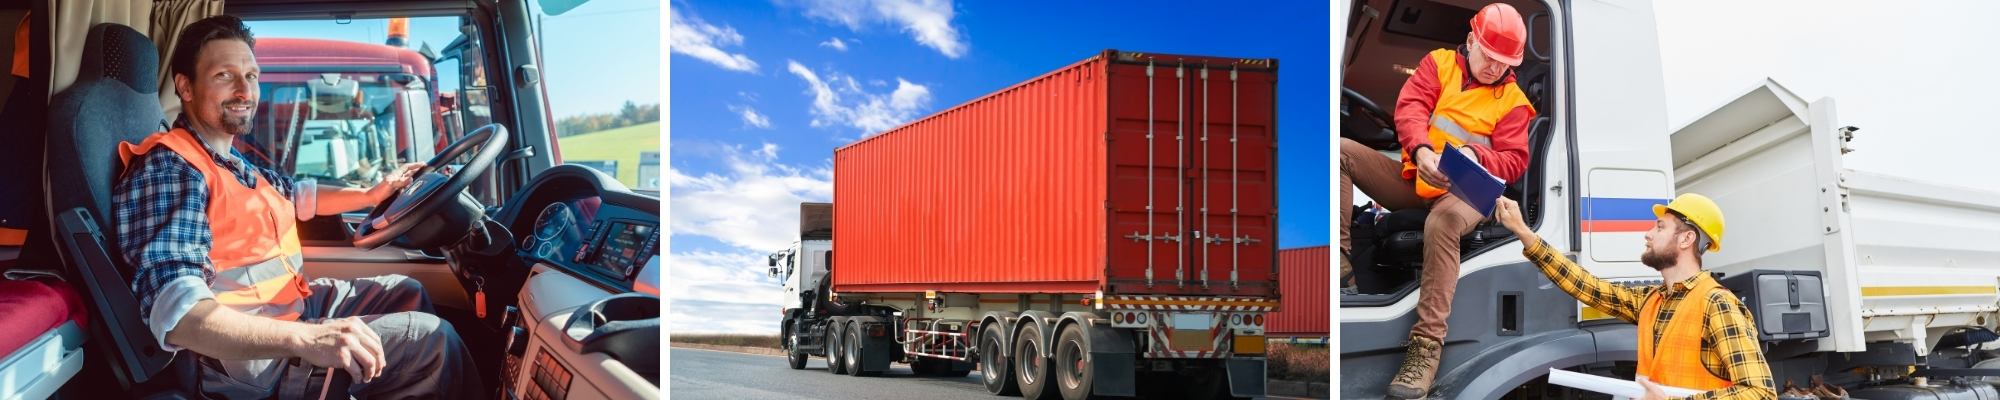 Commercial Truck Business Loans